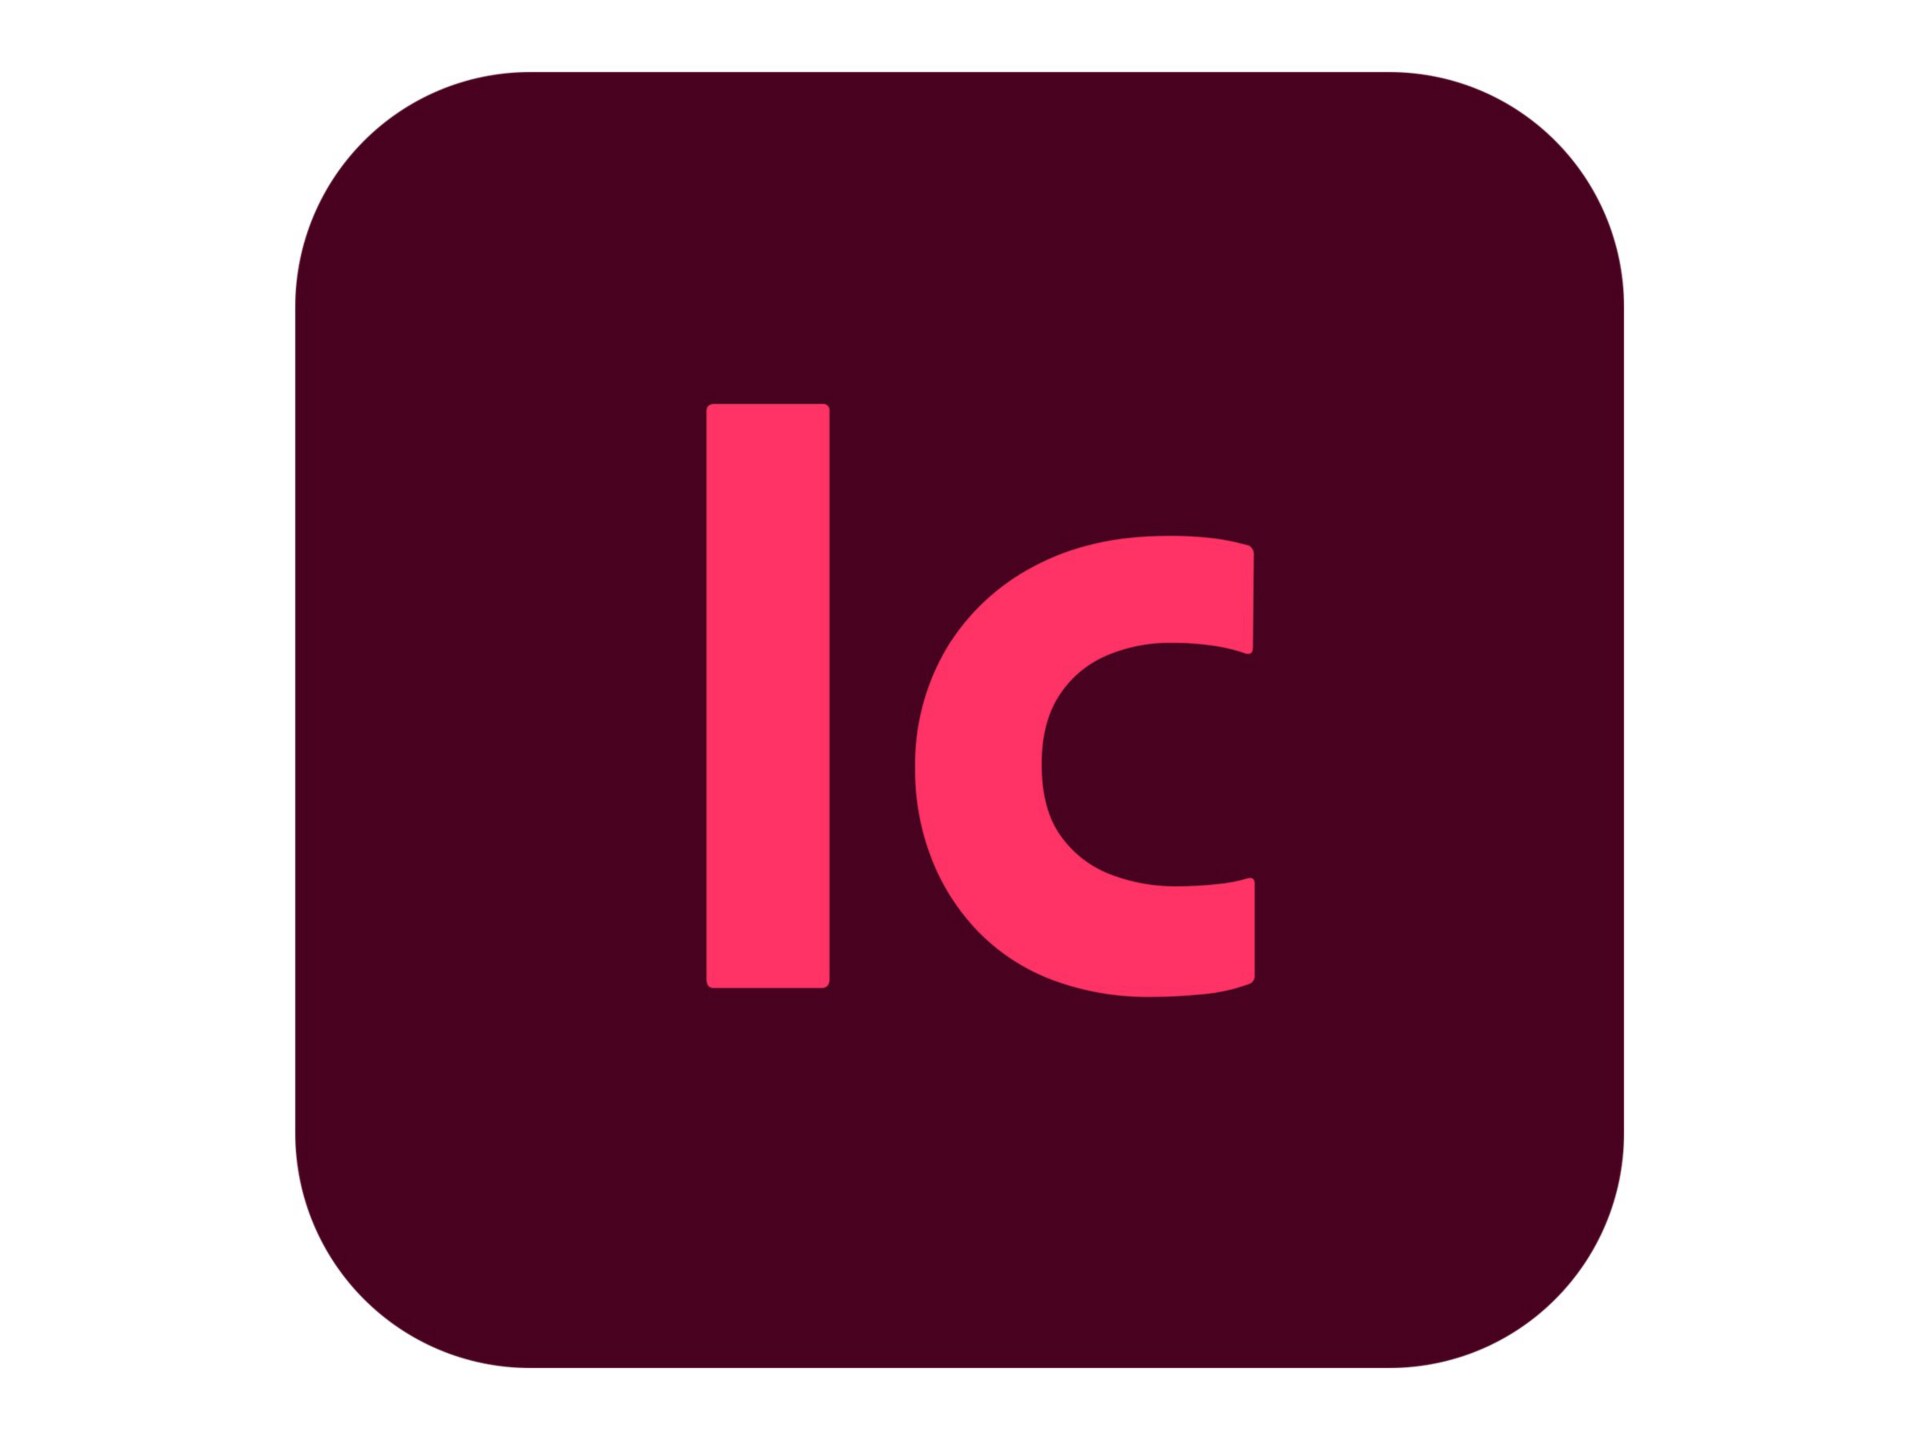 Adobe InCopy CC - Subscription New (13 months) - 1 user